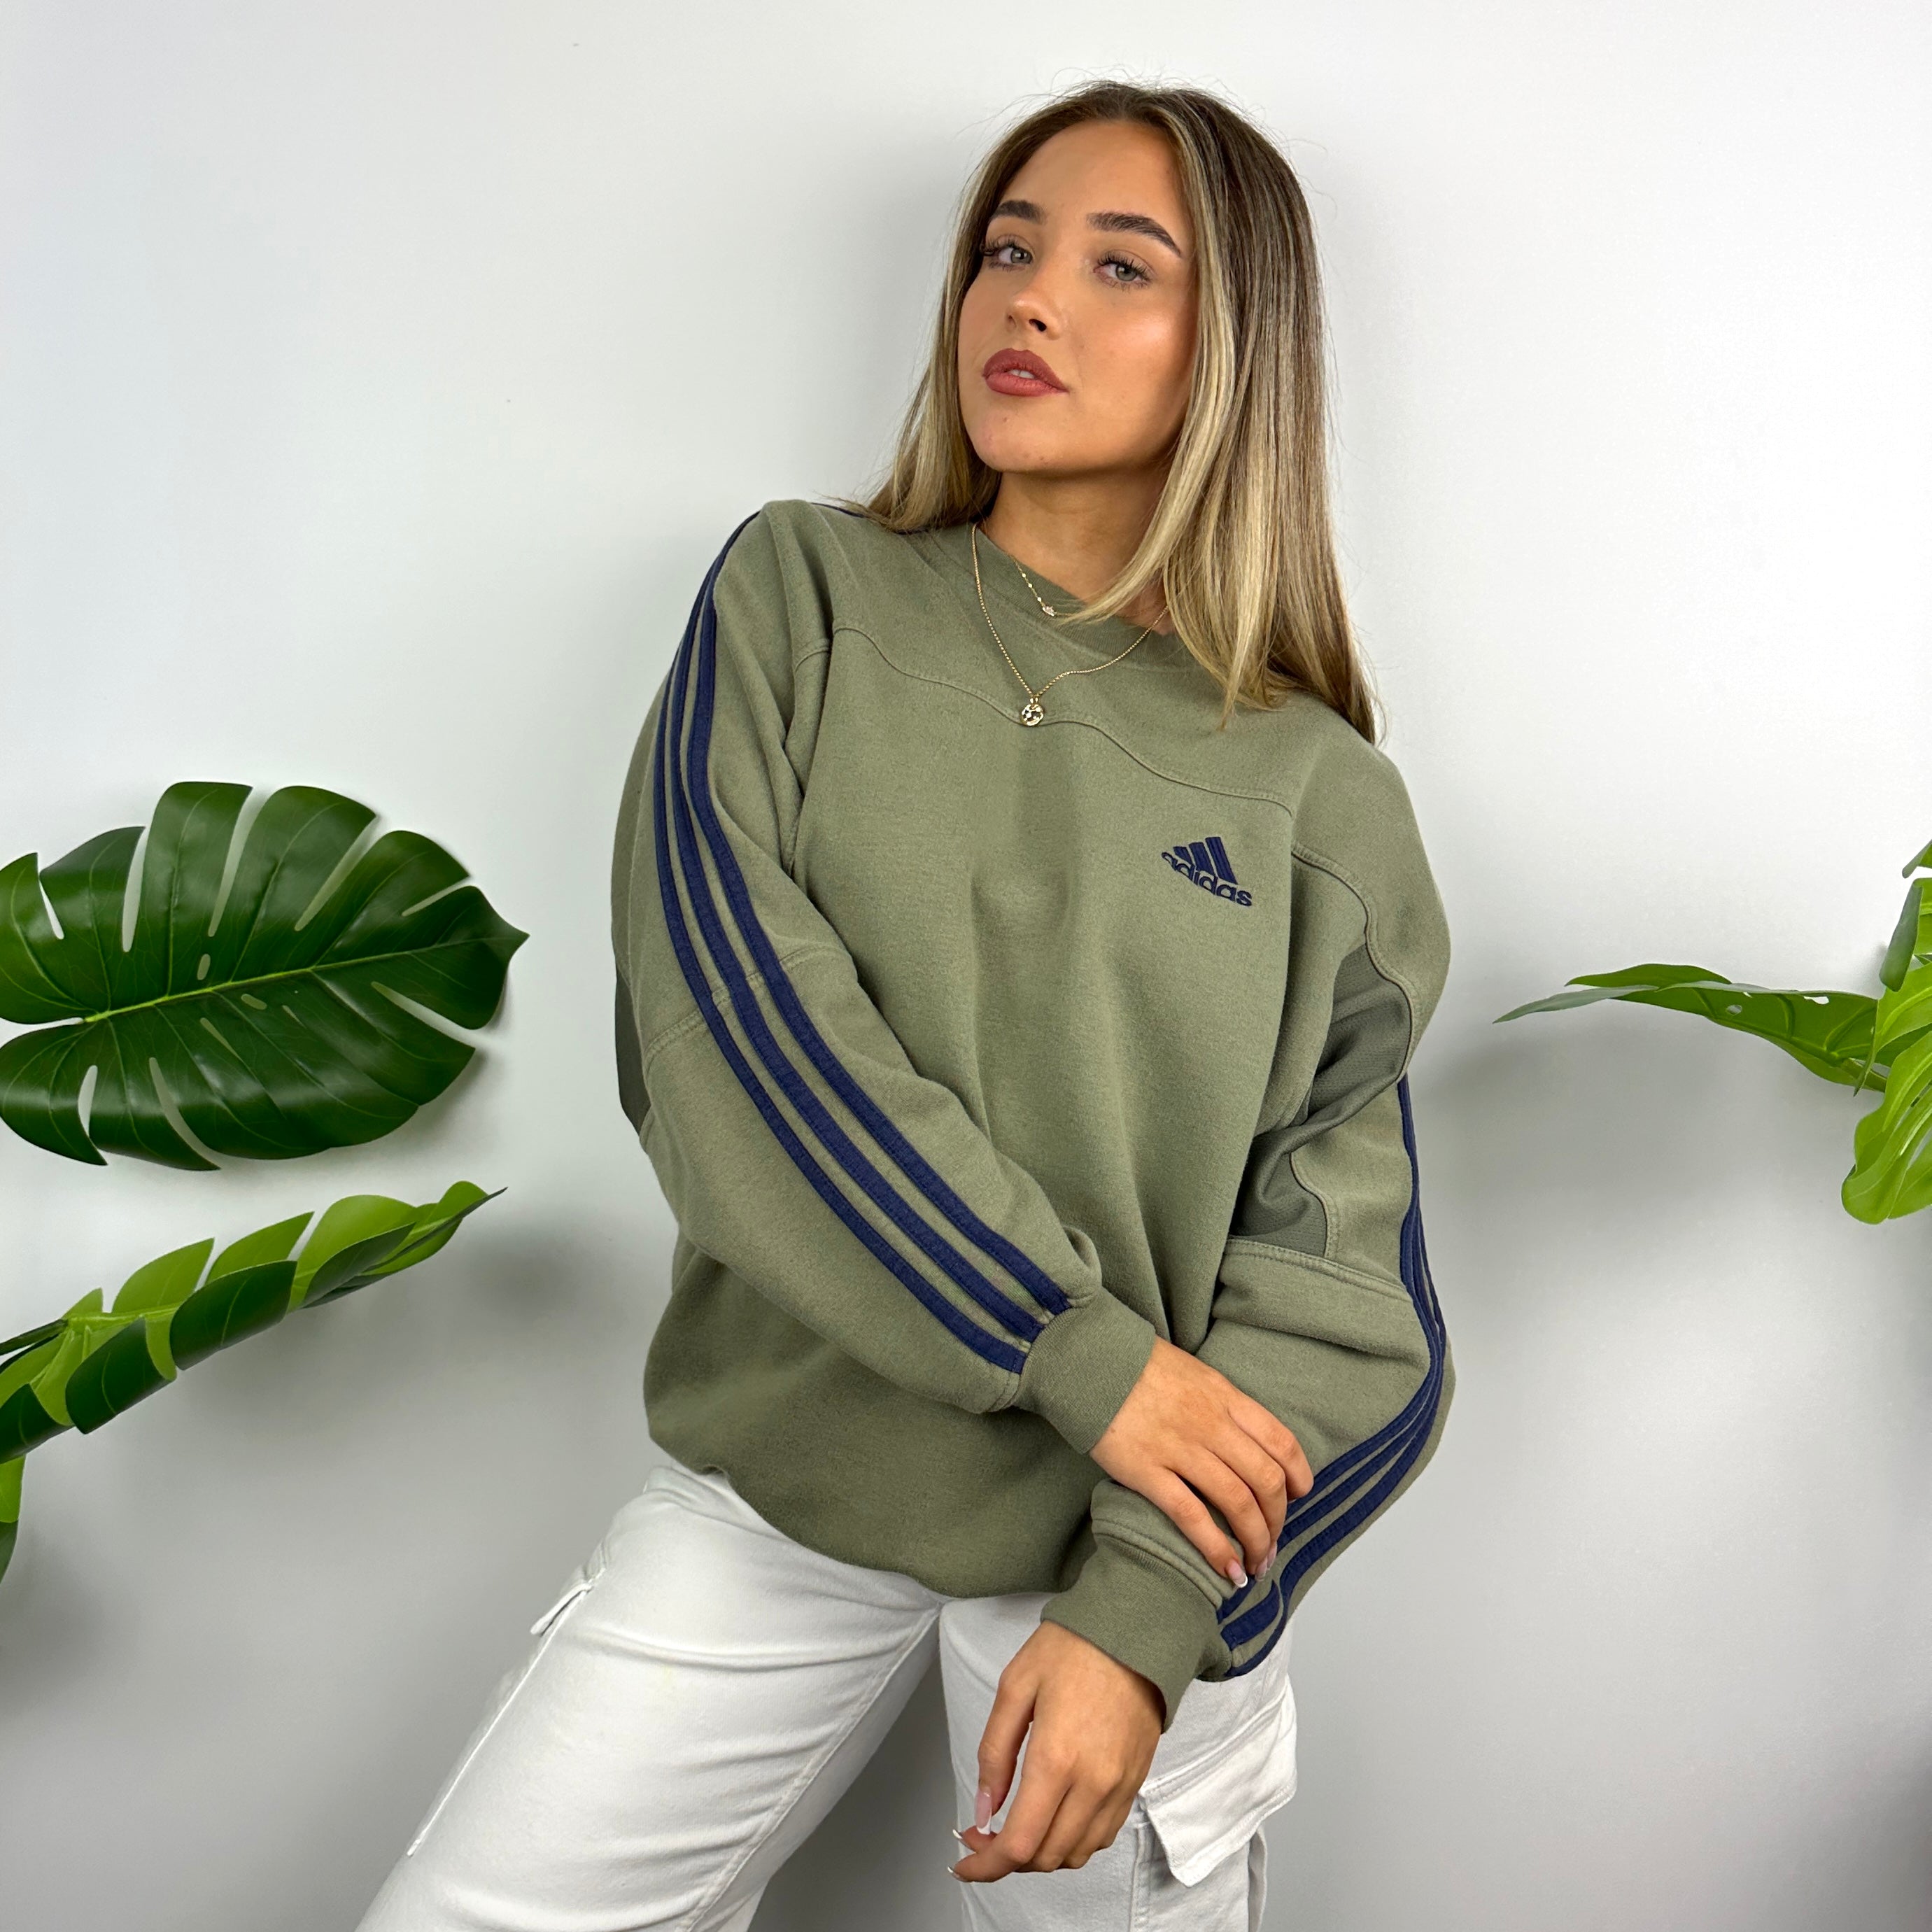 Adidas Khaki Green Embroidered Spell Out Sweatshirt (L)